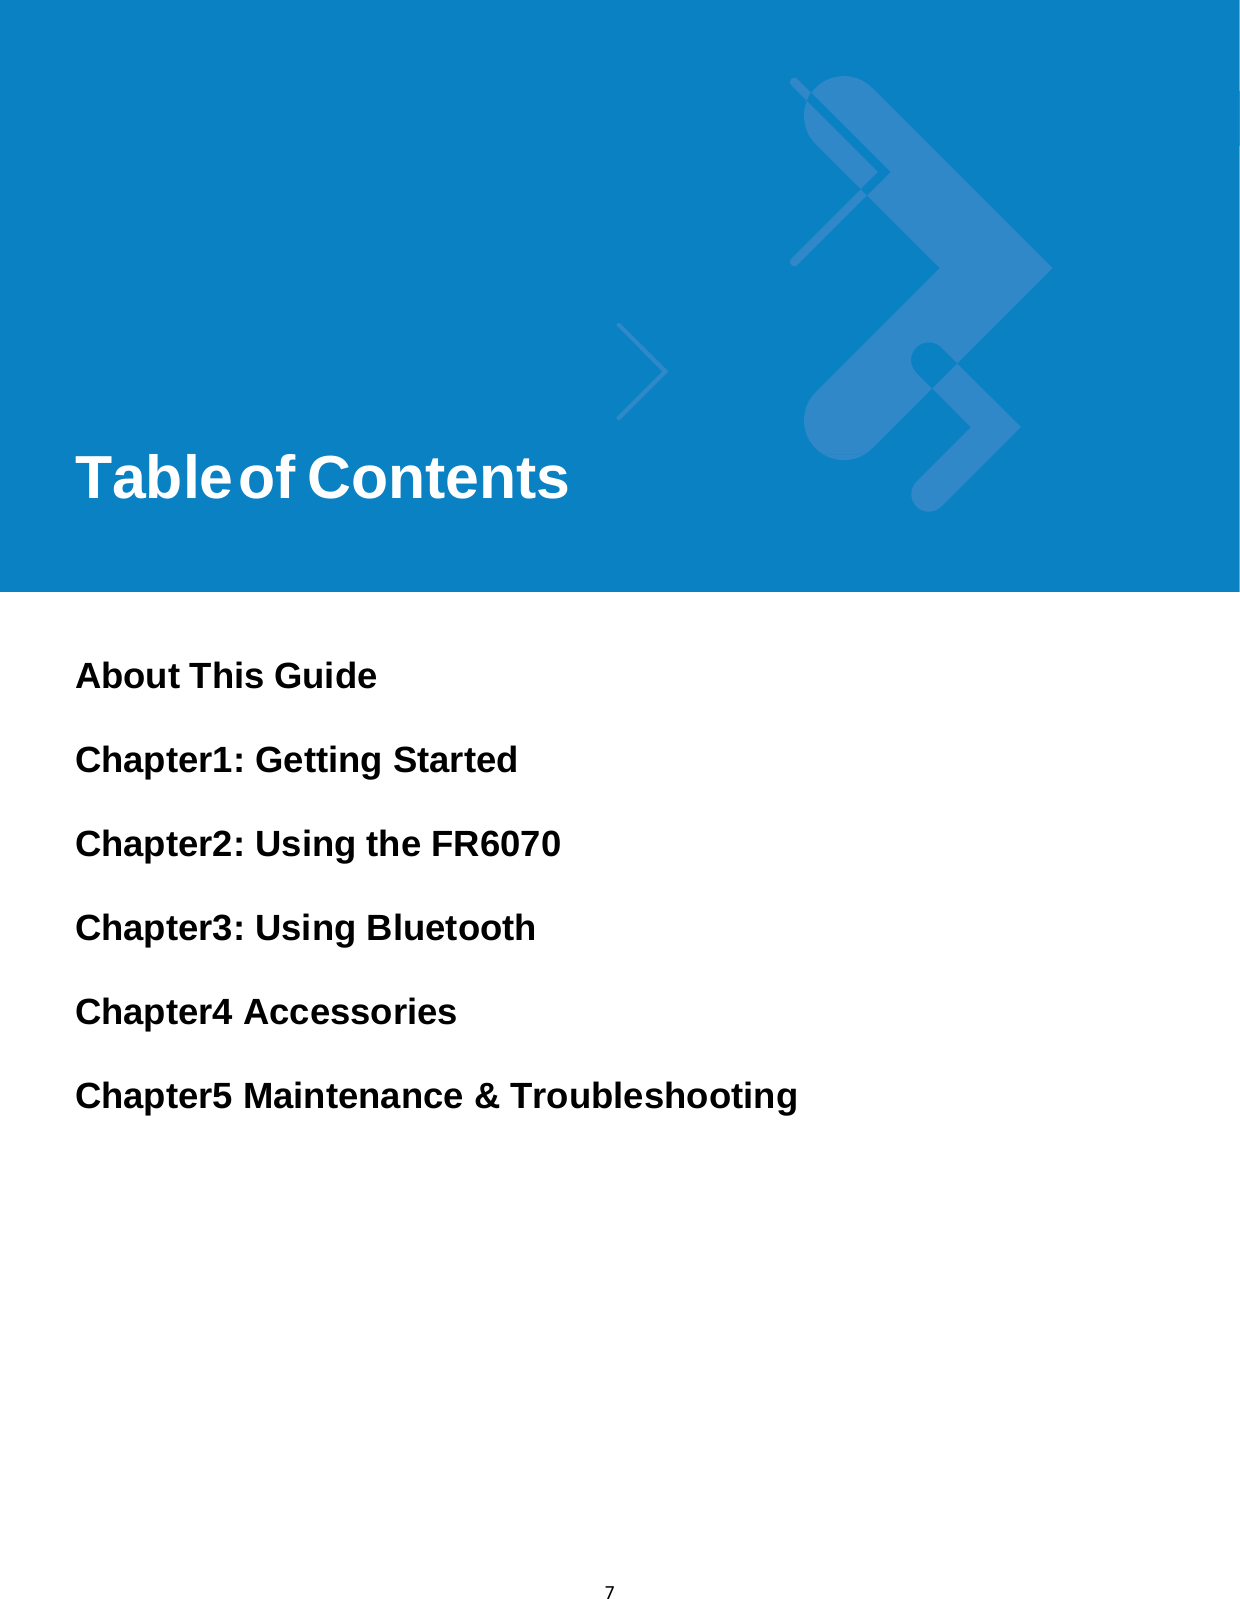 Table of Contentsix 7               Table of Contents        About This Guide  Chapter1: Getting Started  Chapter2: Using the FR6070  Chapter3: Using Bluetooth  Chapter4 Accessories  Chapter5 Maintenance &amp; Troubleshooting      